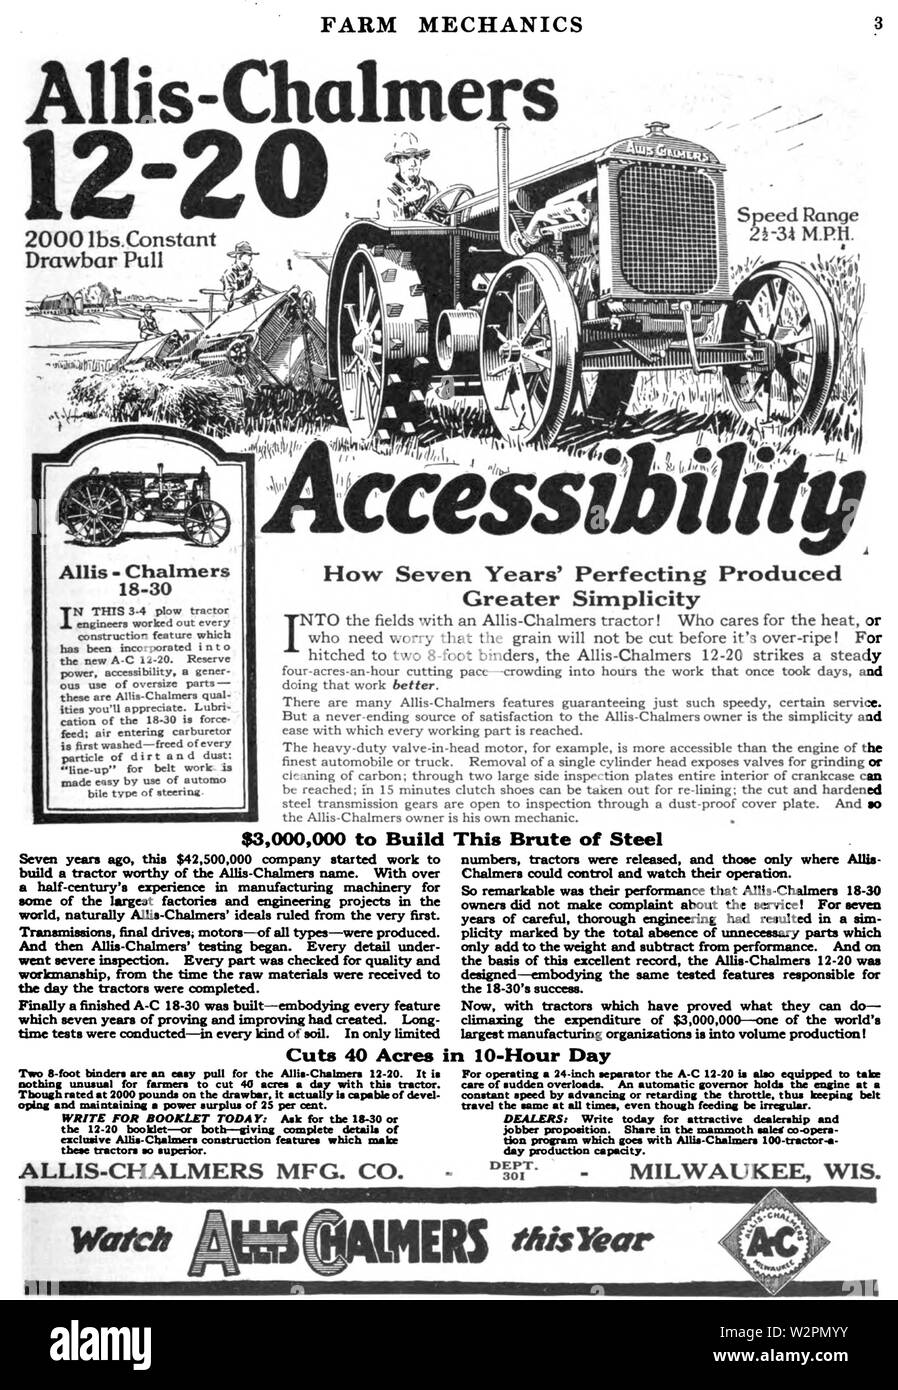 Allis-Chalmers tractor advert in Farm Mechanics May 1921 v5 n1 p3 Stock Photo